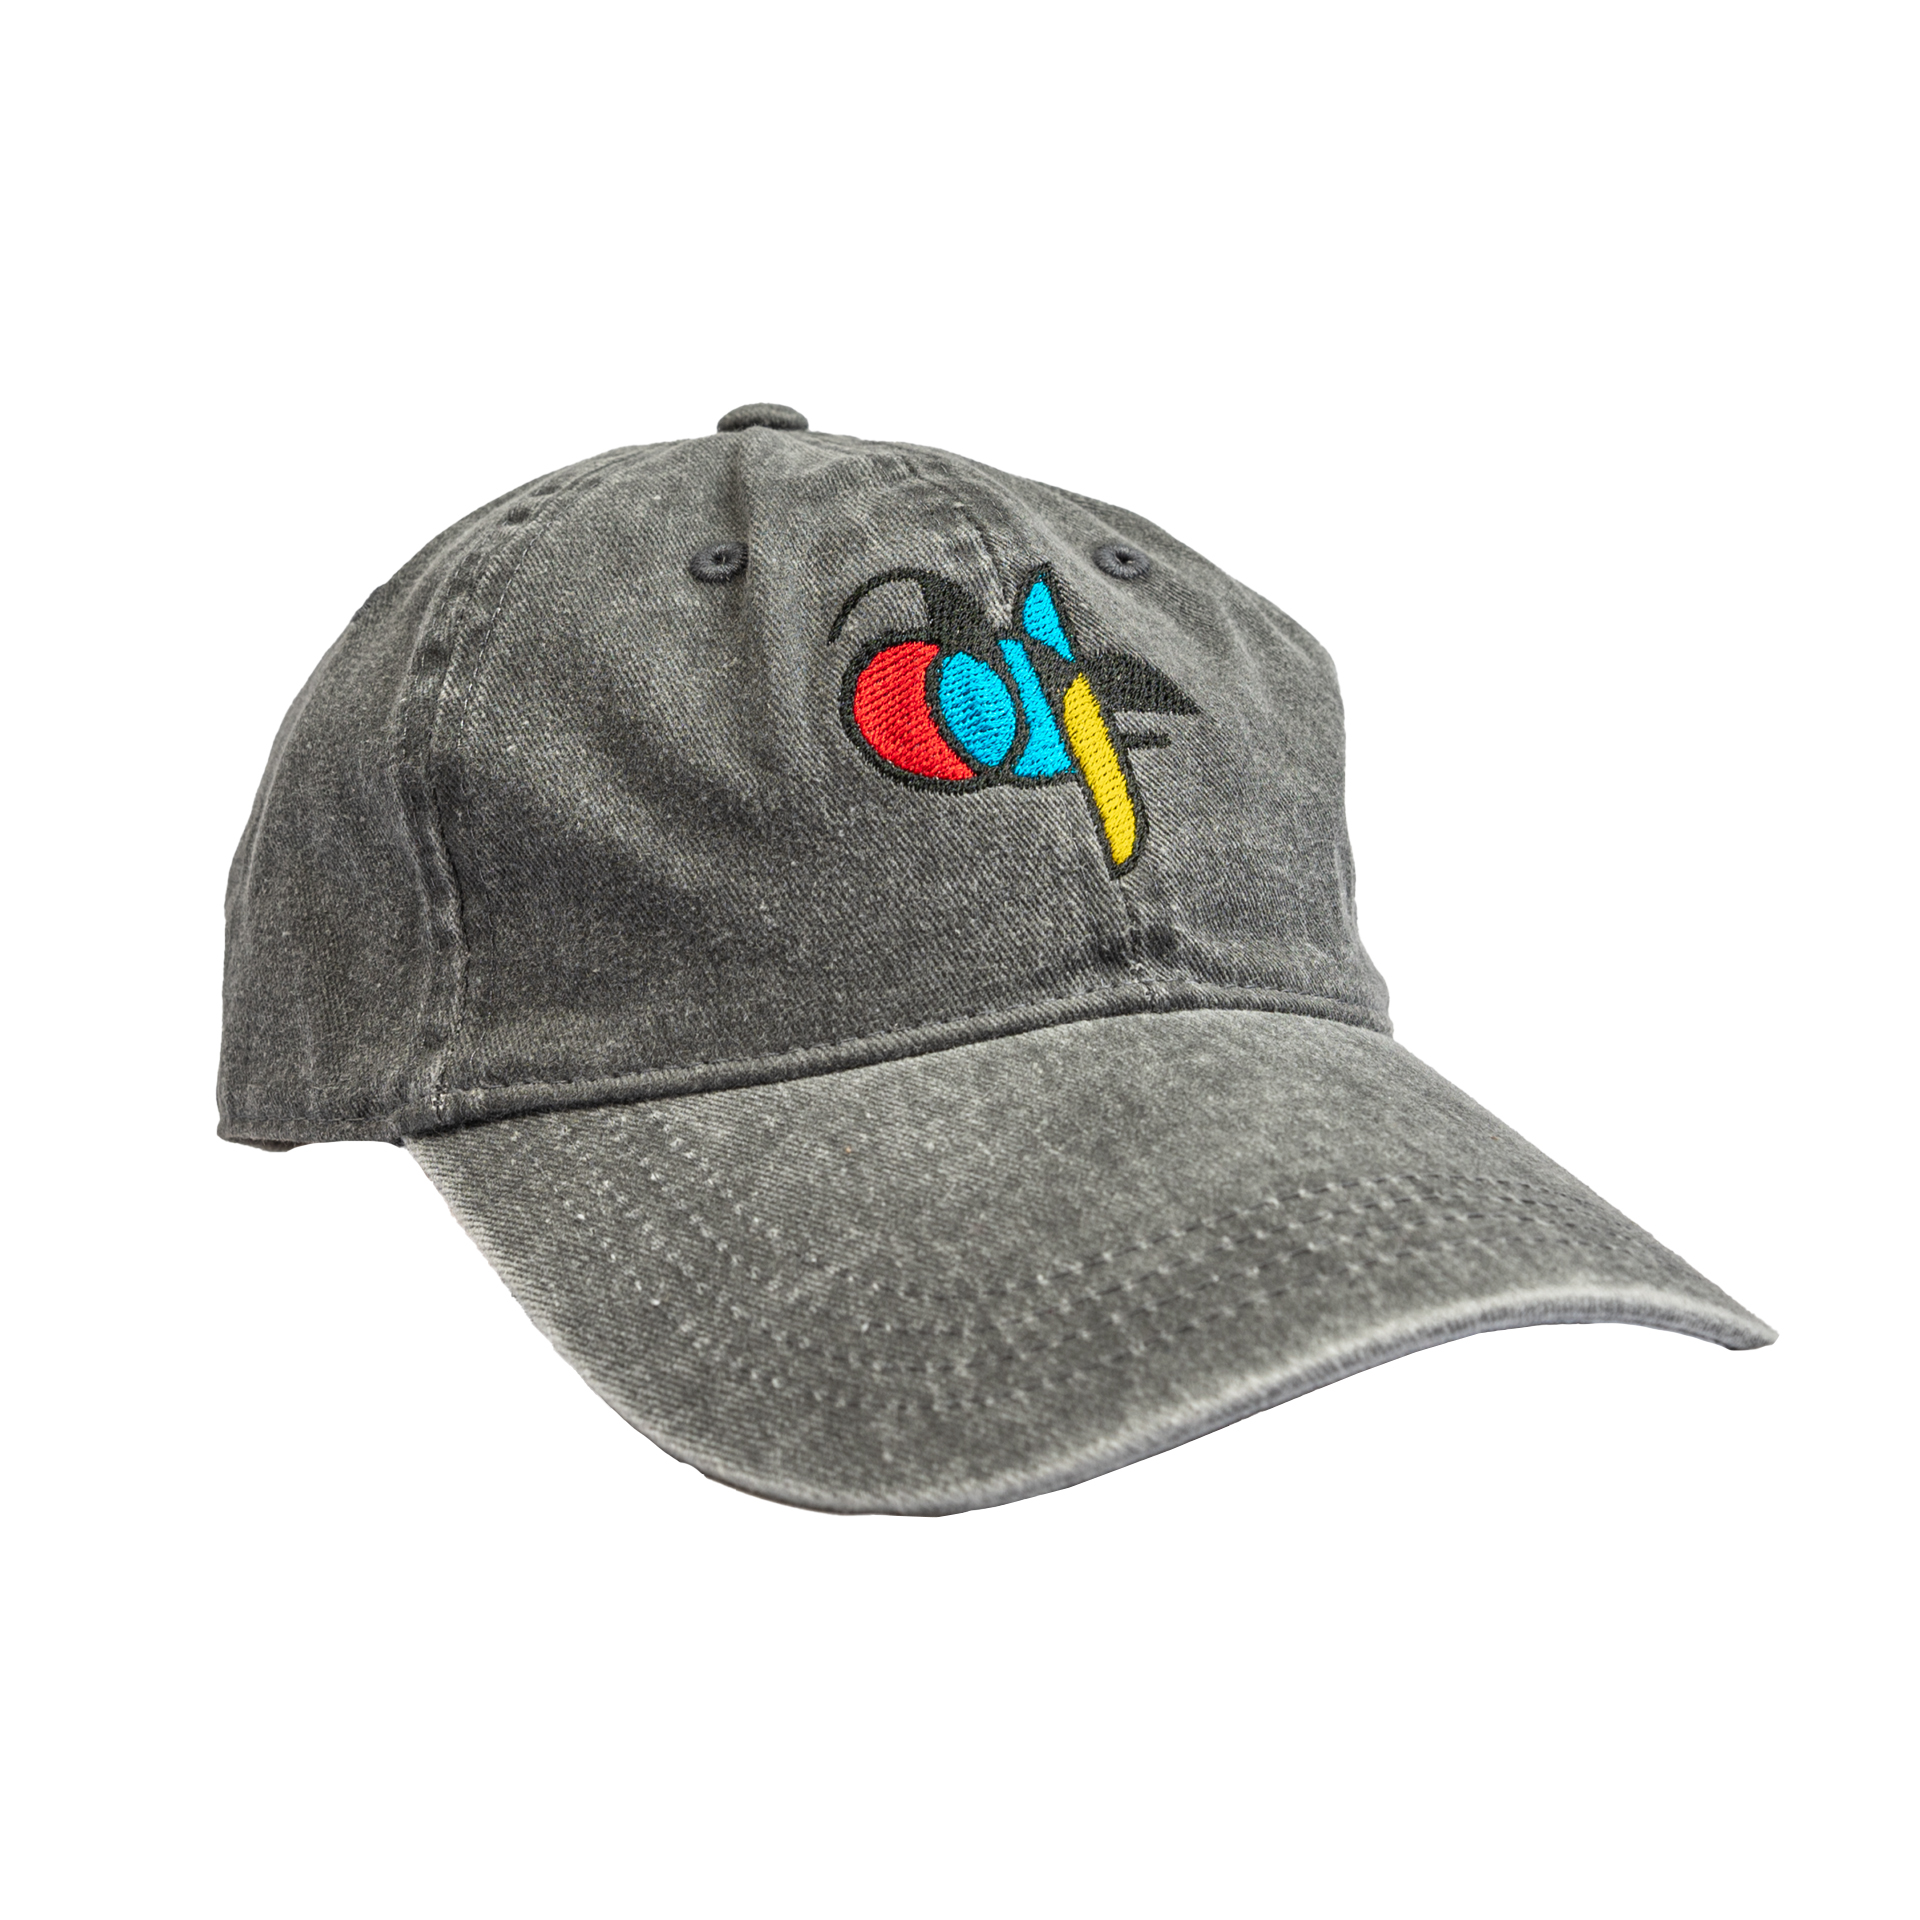 Grey hat with a stylized ADF 